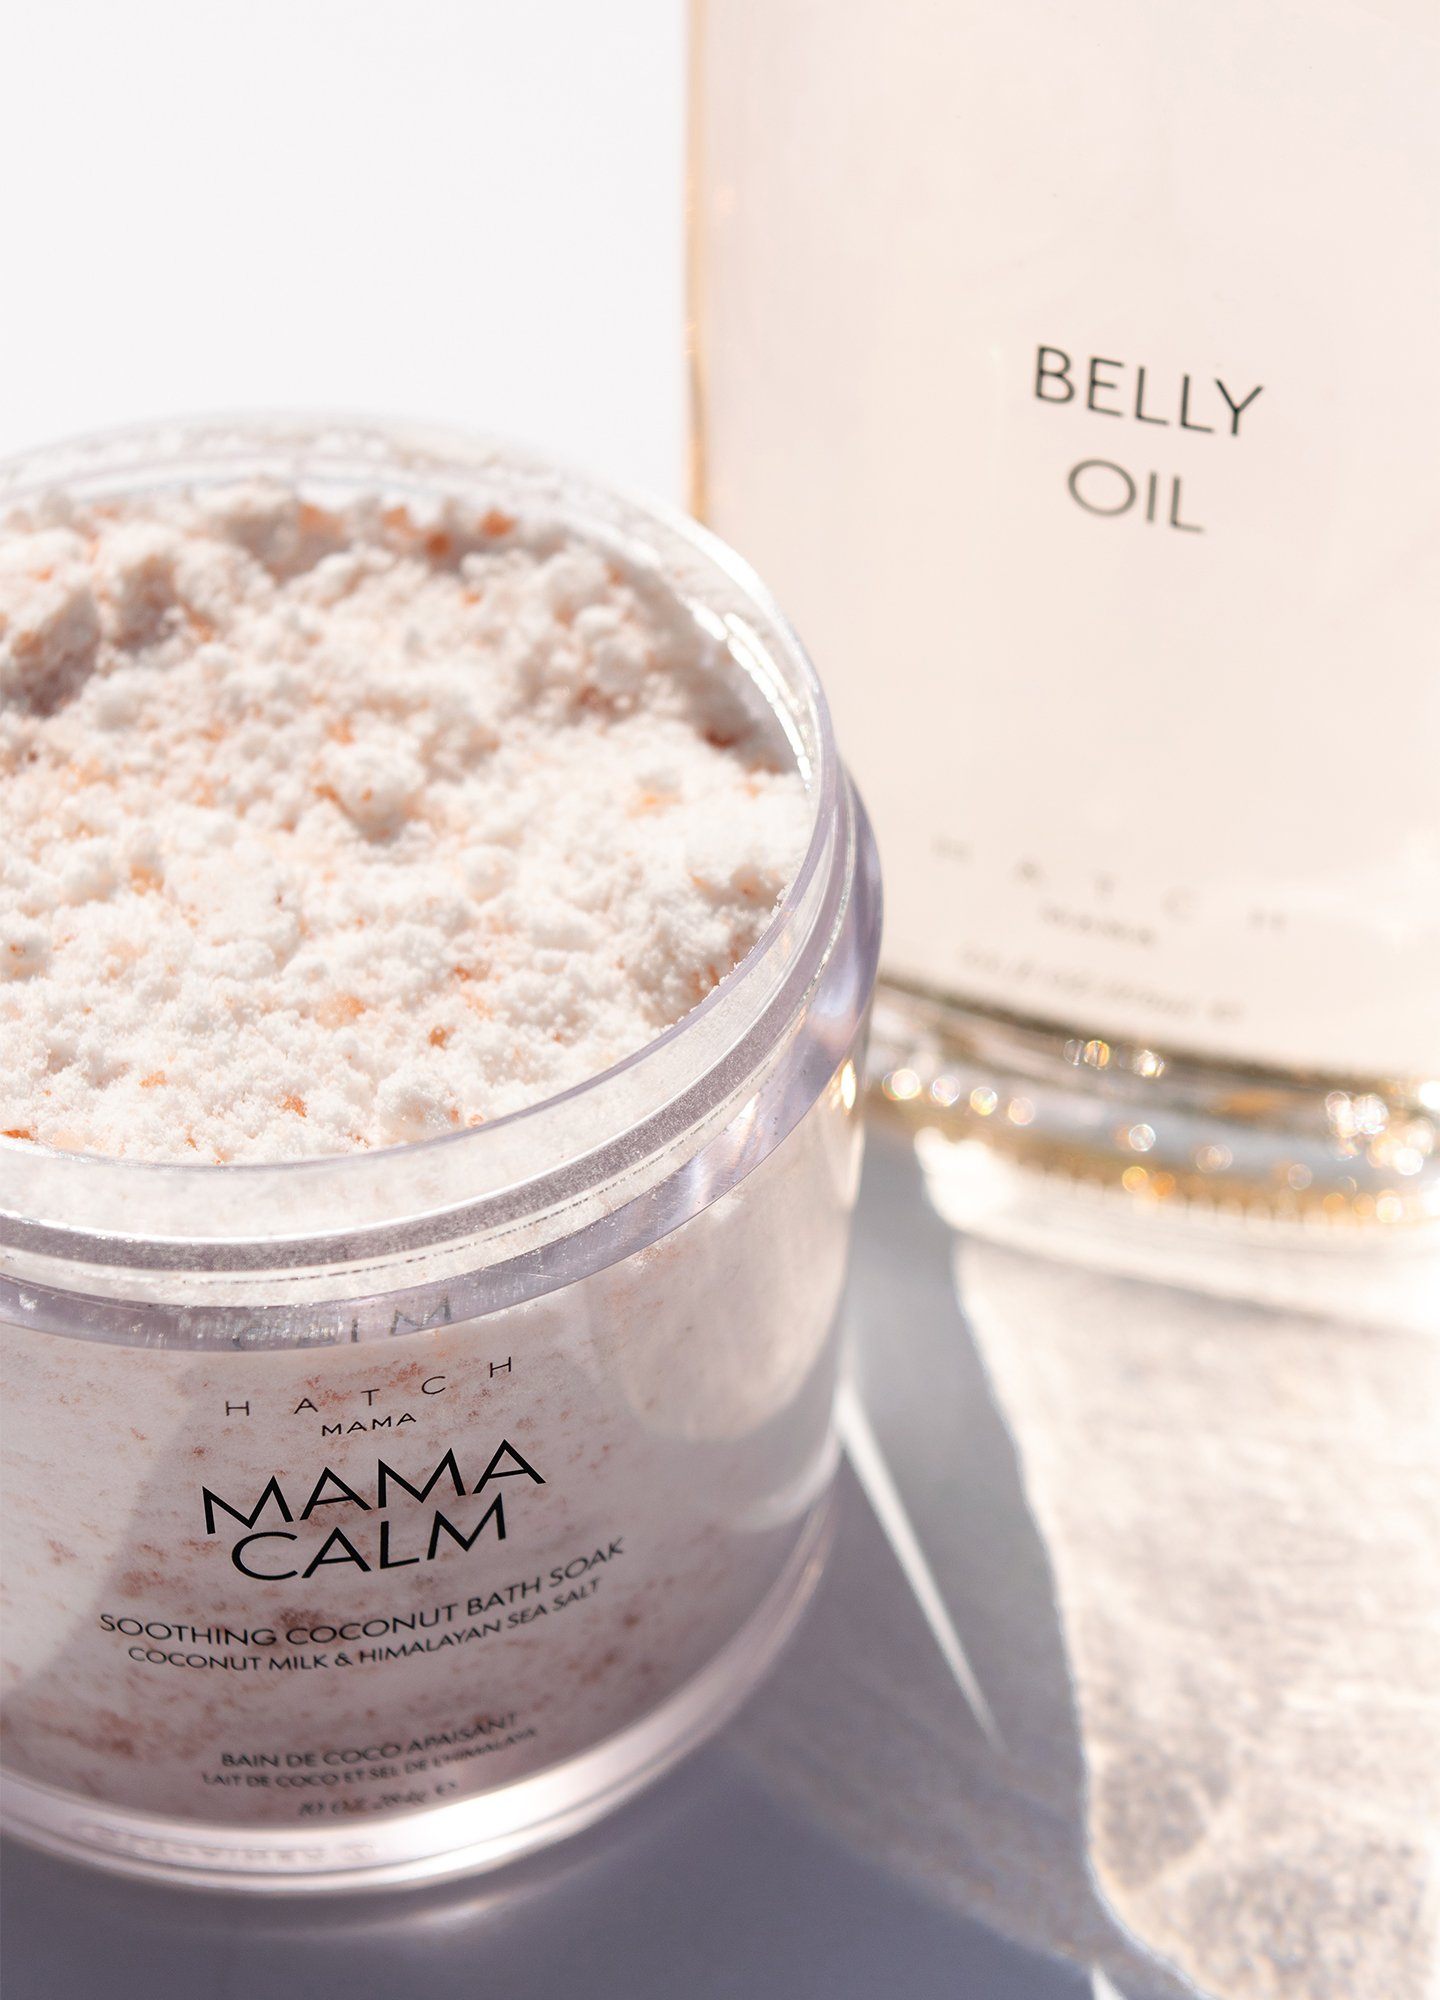 Spa Day Kit - Belly Oil, Mama Calm & Dry Brush